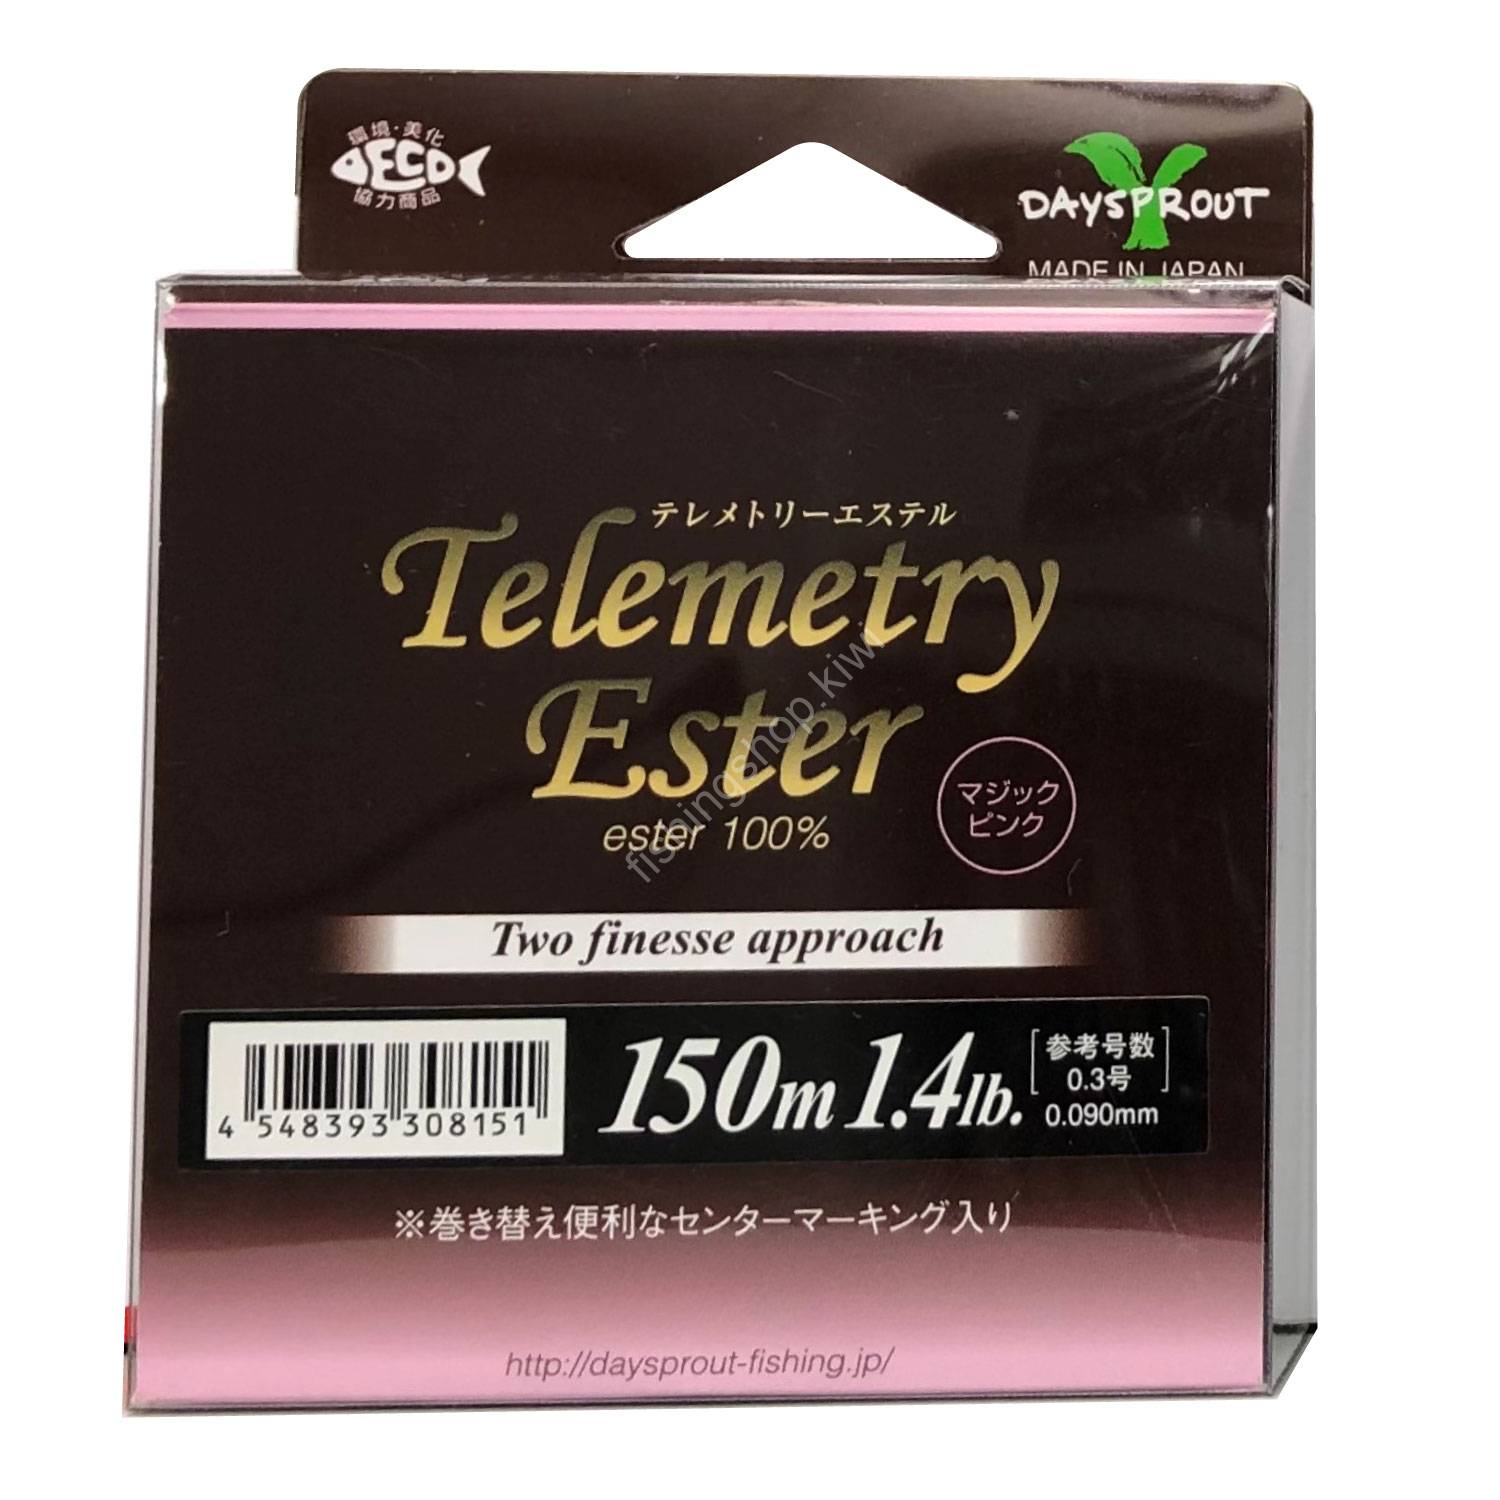 DAYSPROUT Telemetry Ester Magic Pink 150m 2lb #0.4 Fishing lines